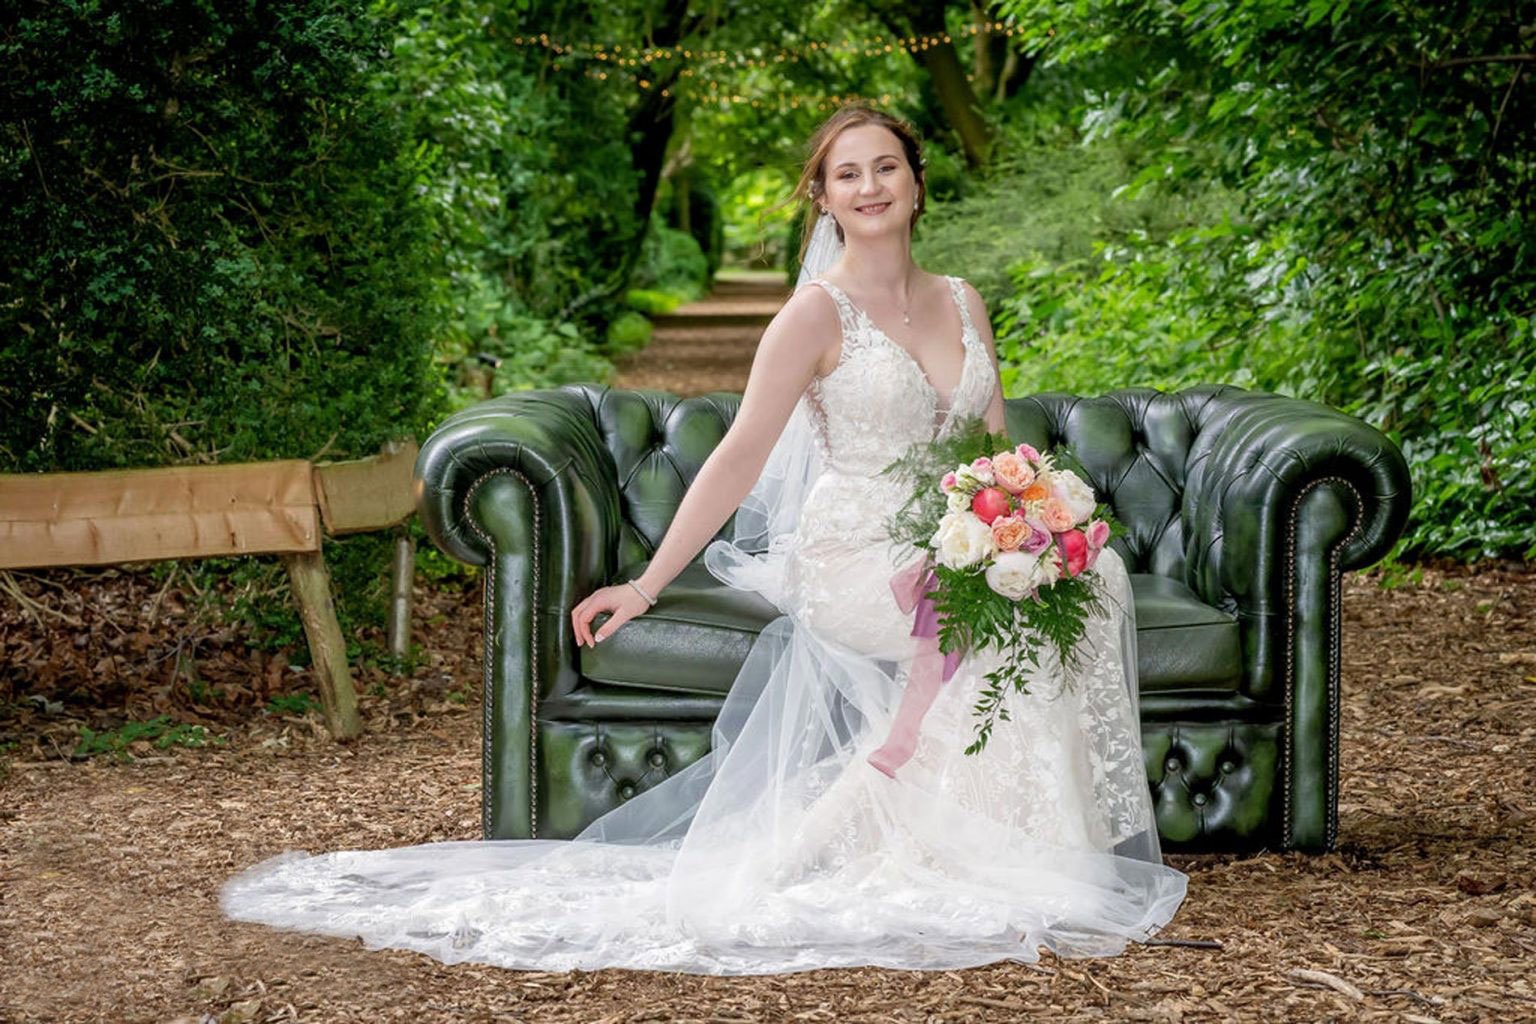  Bride sat on a green Chesterfield sofa which has been placed outside on a bark lined path with woodland either side.  The bride is holding her hand tied bridal bouquet in her lap. The various sized blooms in pinks and white are framed by green ferns